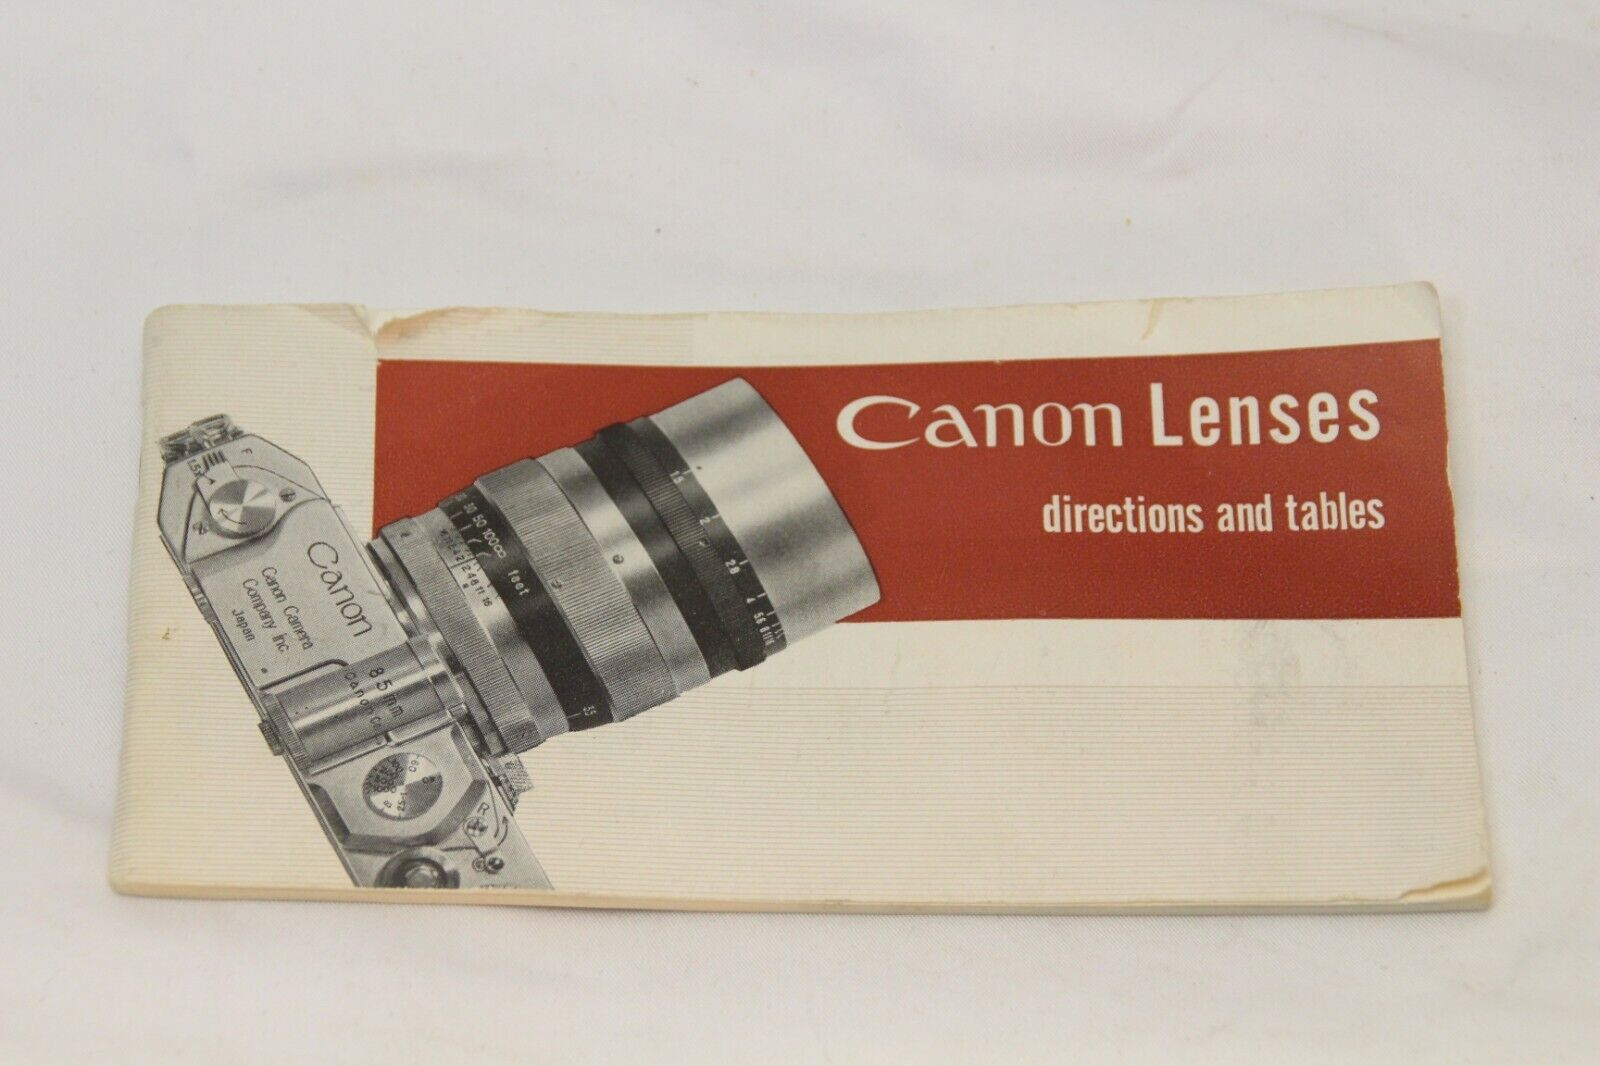 Canon Lenses Directions and Tables 1955 Booklet Canon II-S cam...